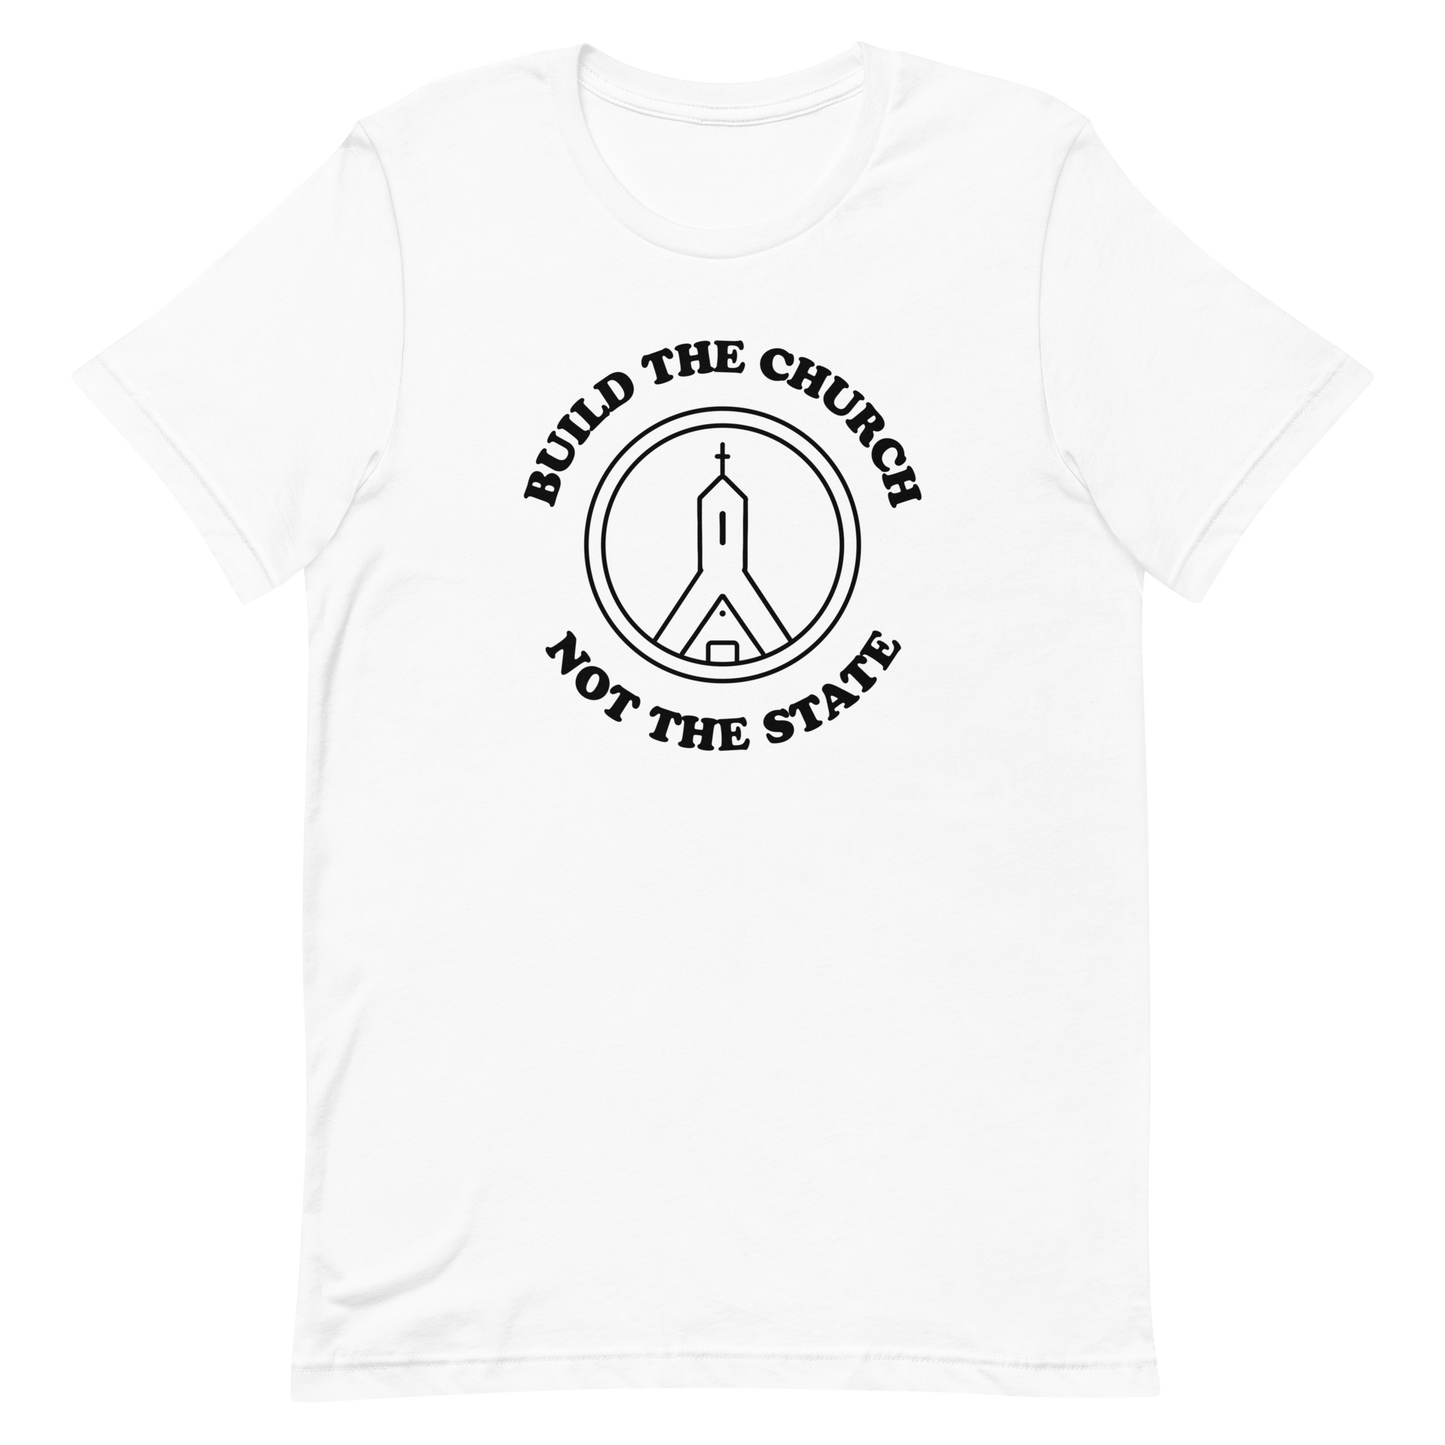 Build The Church Not The State T-shirt